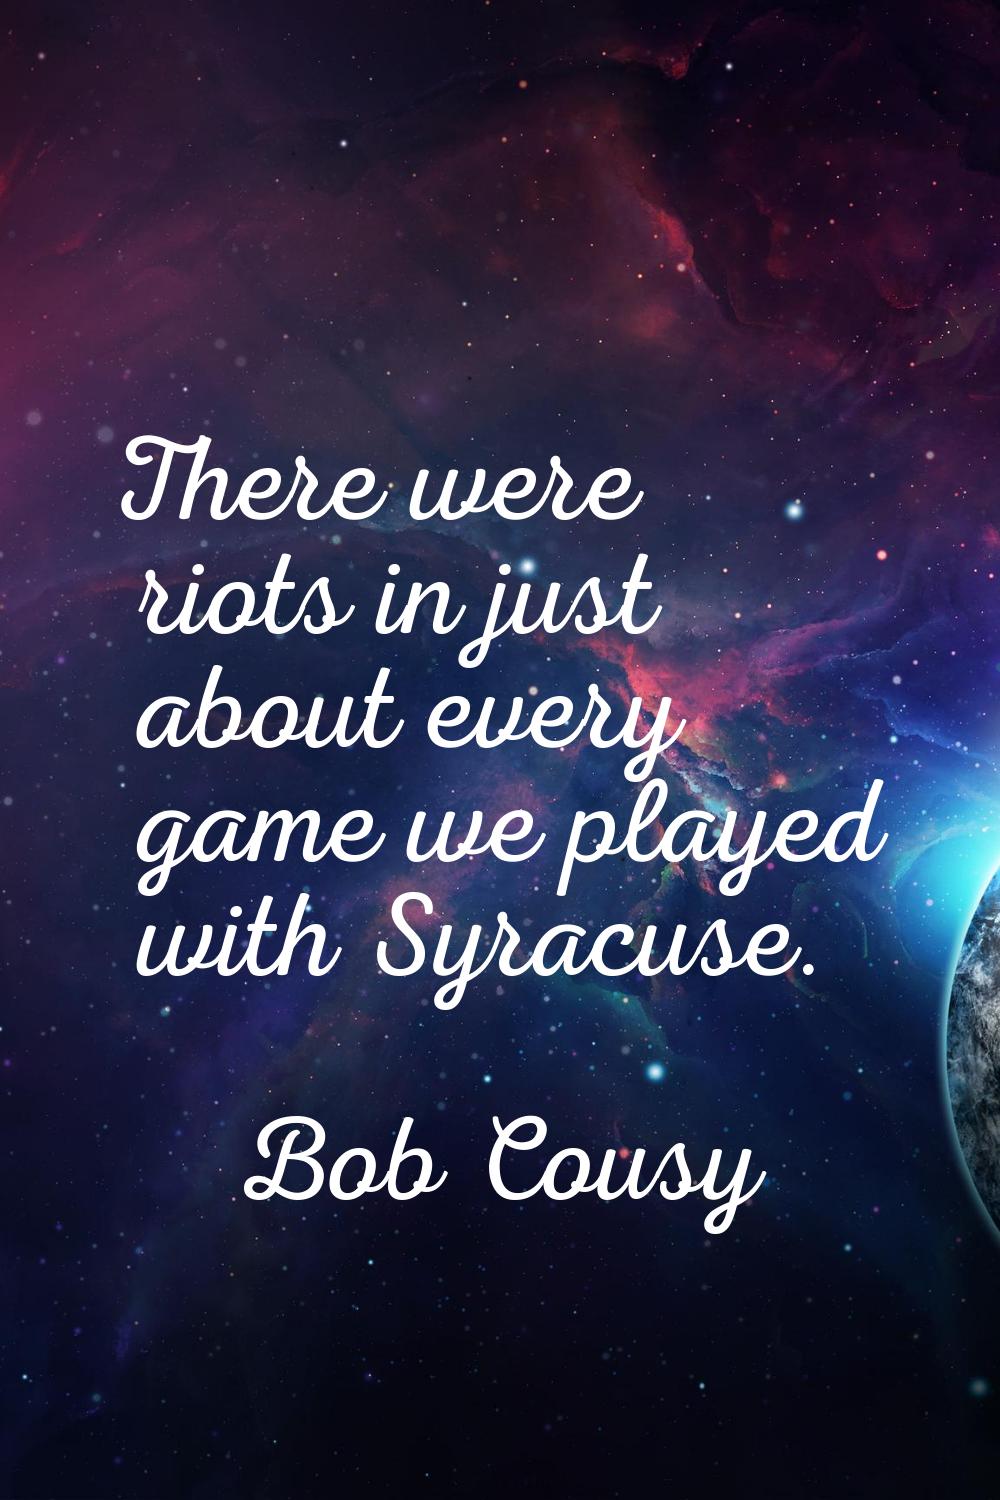 There were riots in just about every game we played with Syracuse.